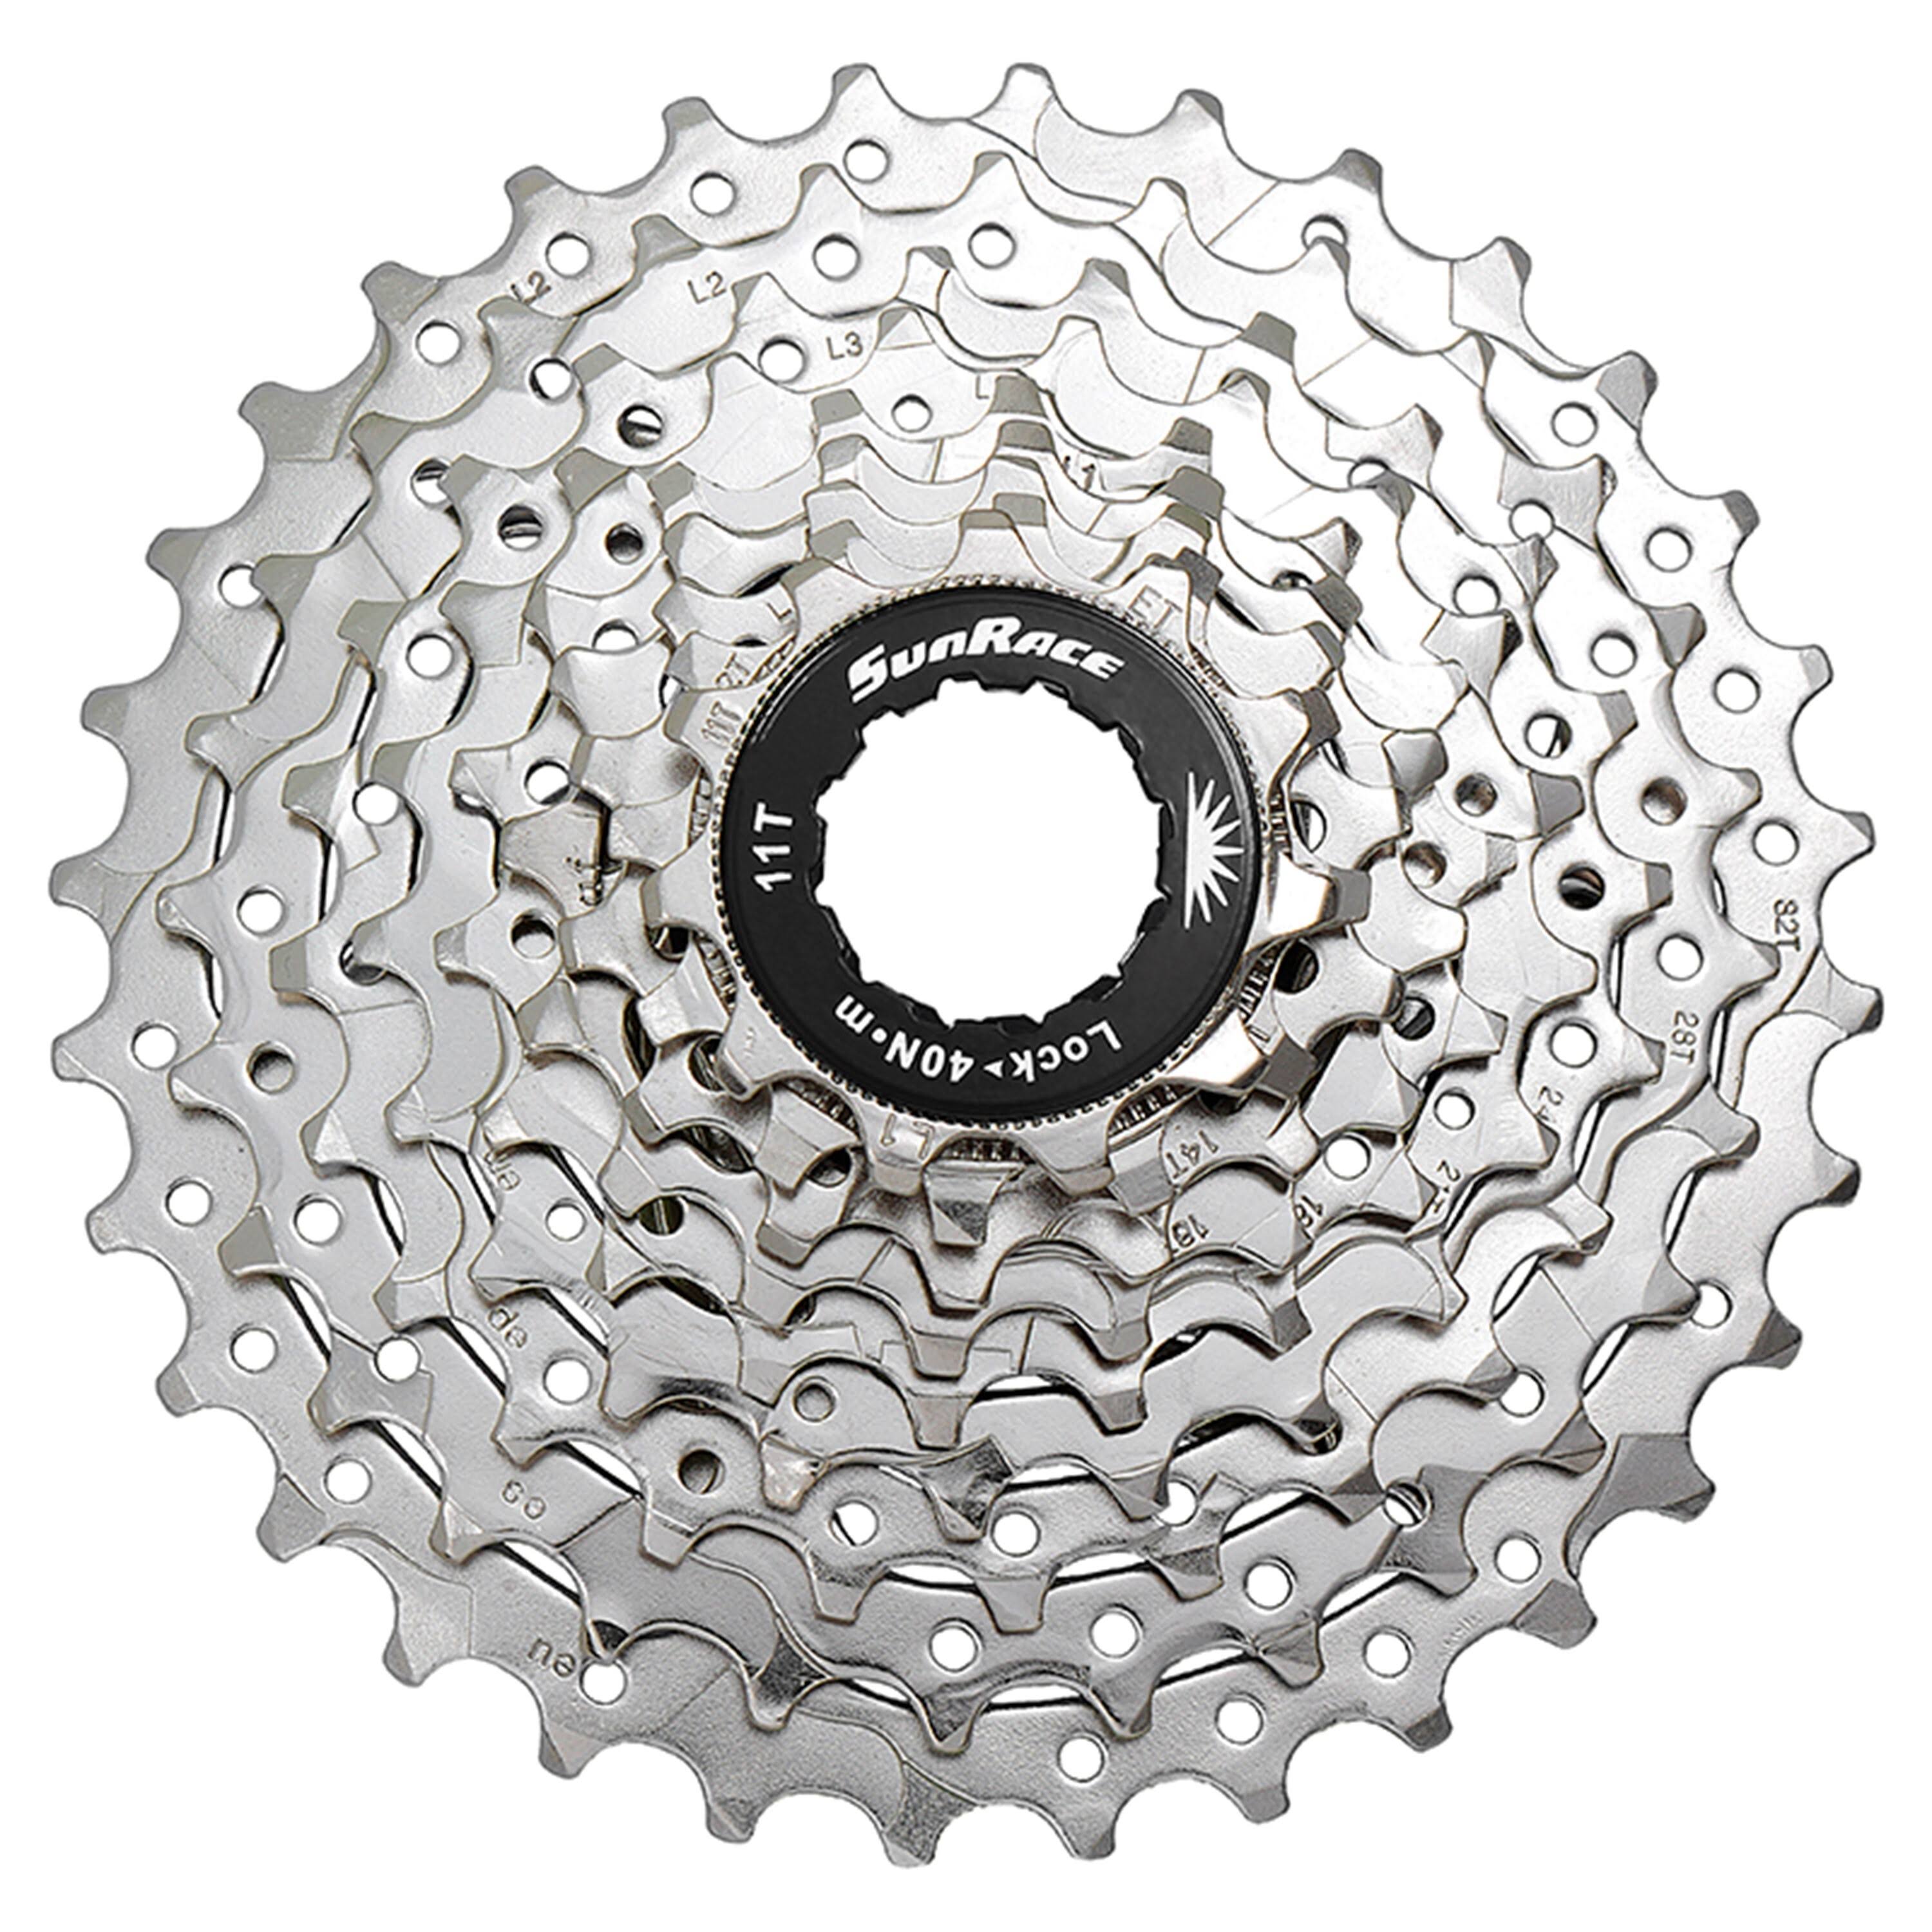 Sunrace Bicycle Cassette Sprocket - 11-32T, 9 Speed